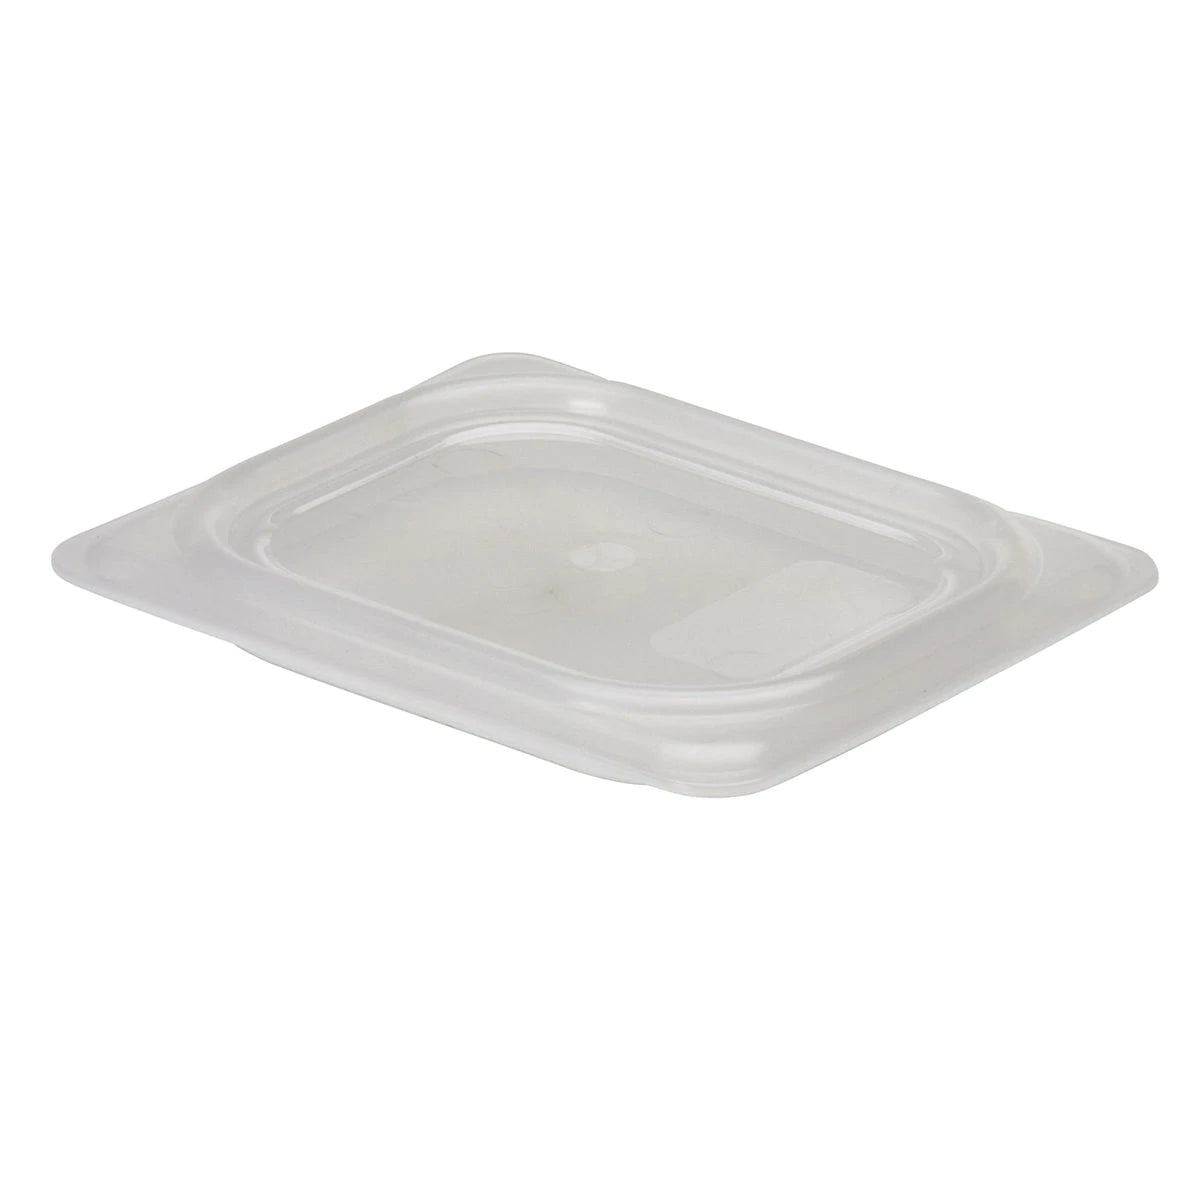 1/2 Half Size Polypropylene Gastronorm lid.Product ref:00386.